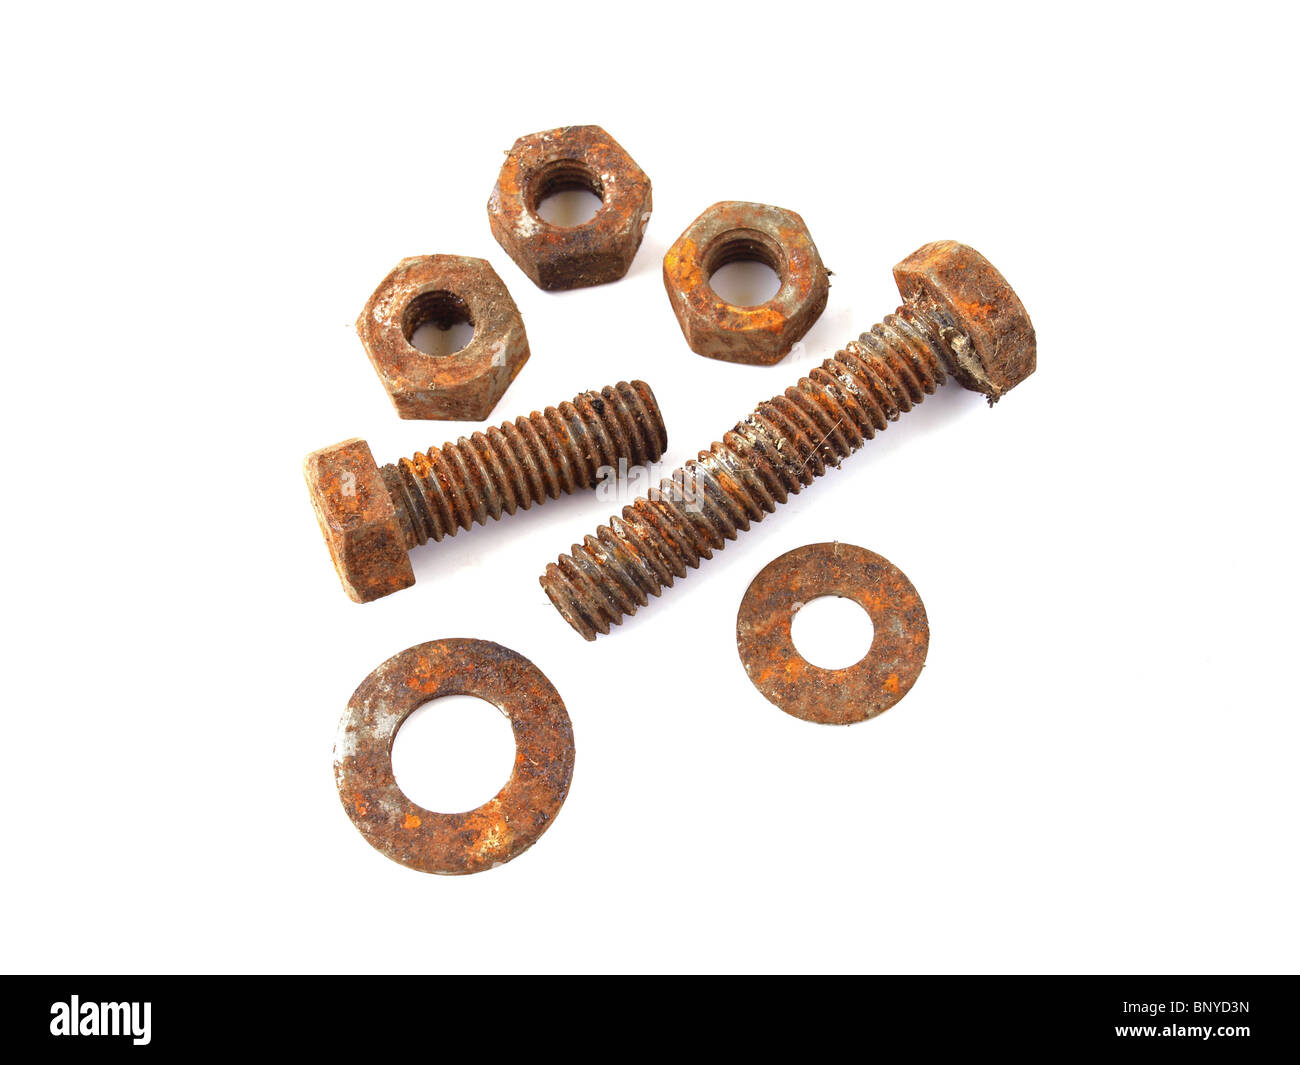 Rusty nuts and bolts on a plain white background. Stock Photo